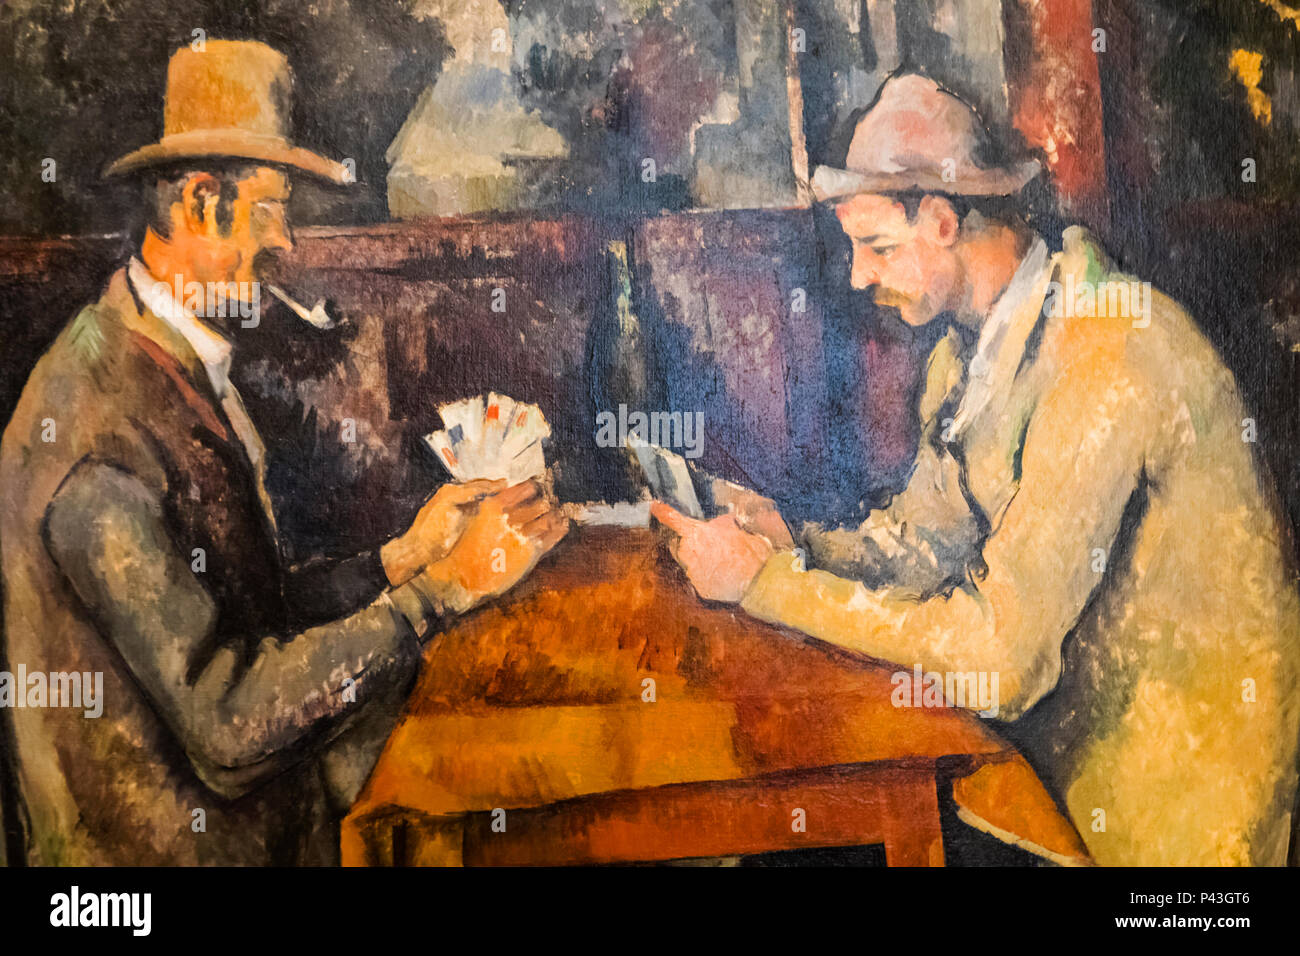 Painting titled 'The Card Players' by Paul Cezanne dated 1892 Stock Photo